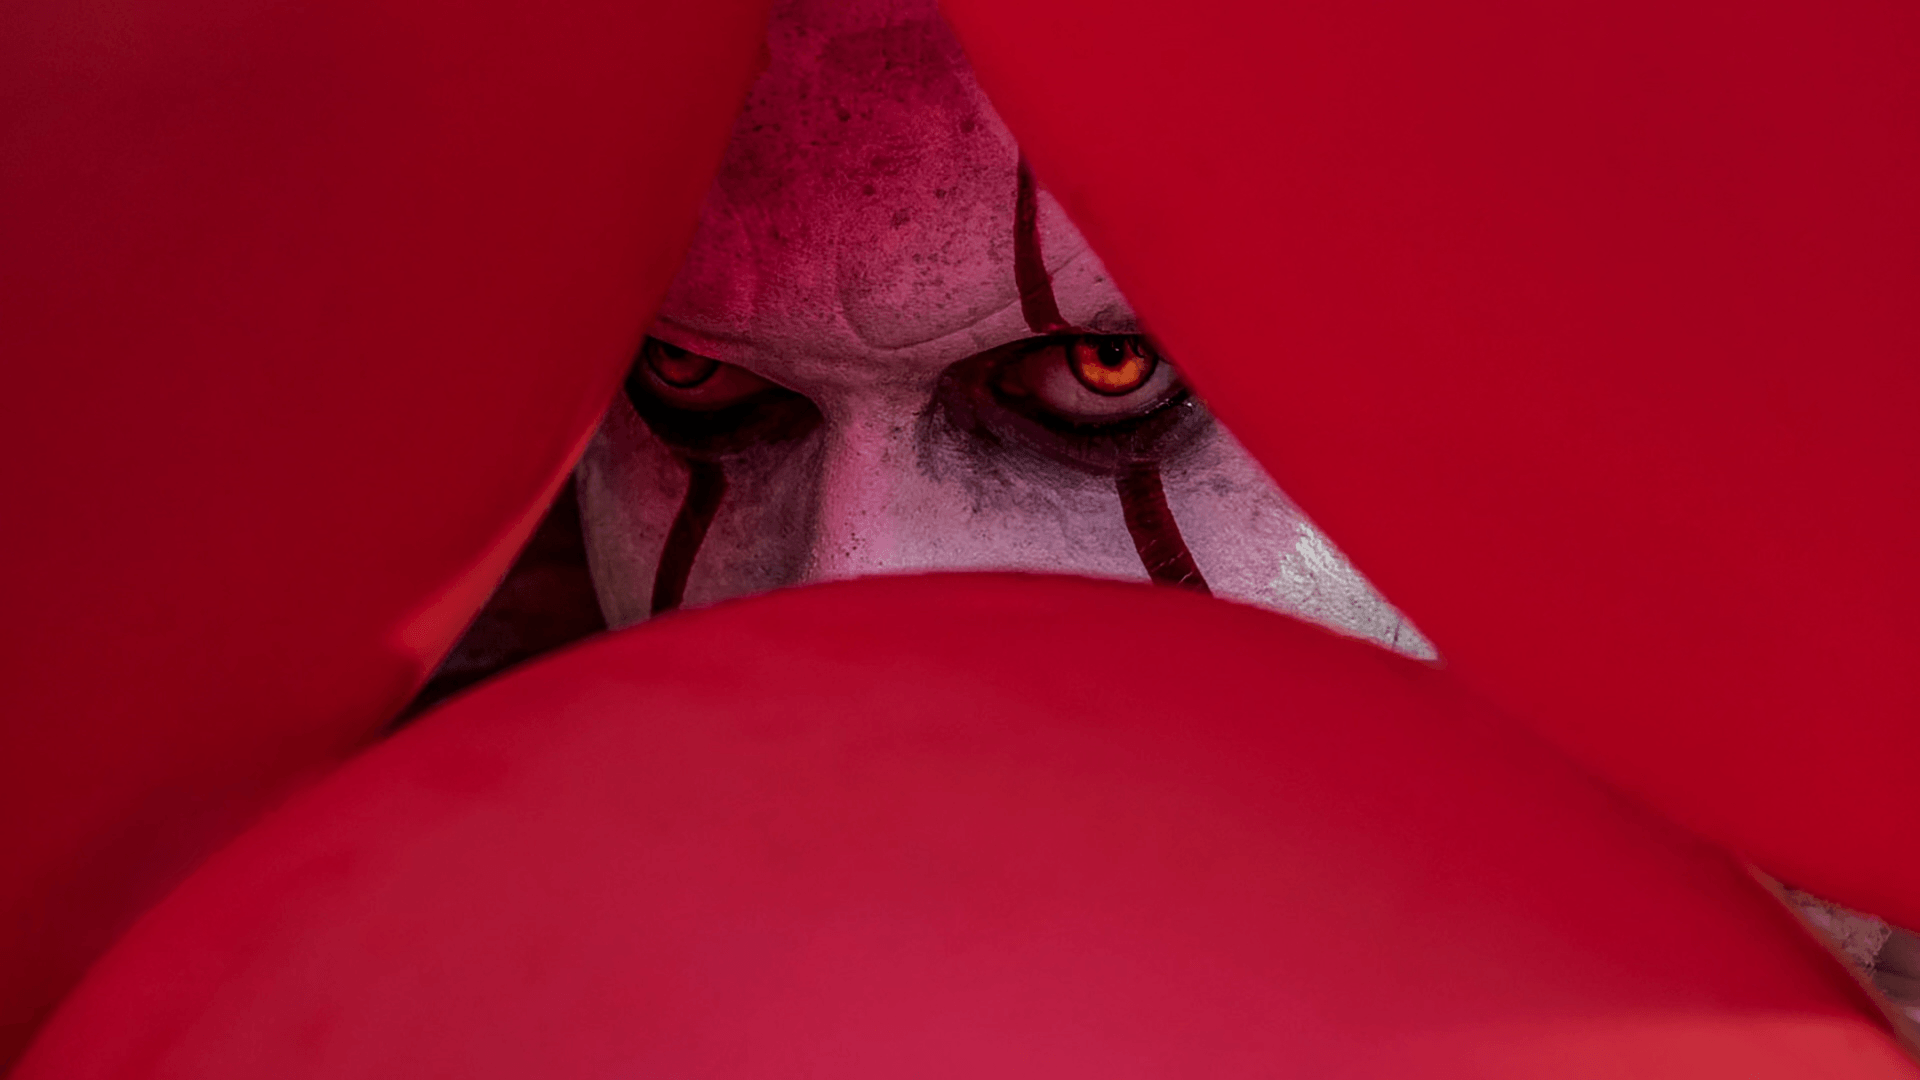 Pennywise Compilation [1920x1080]